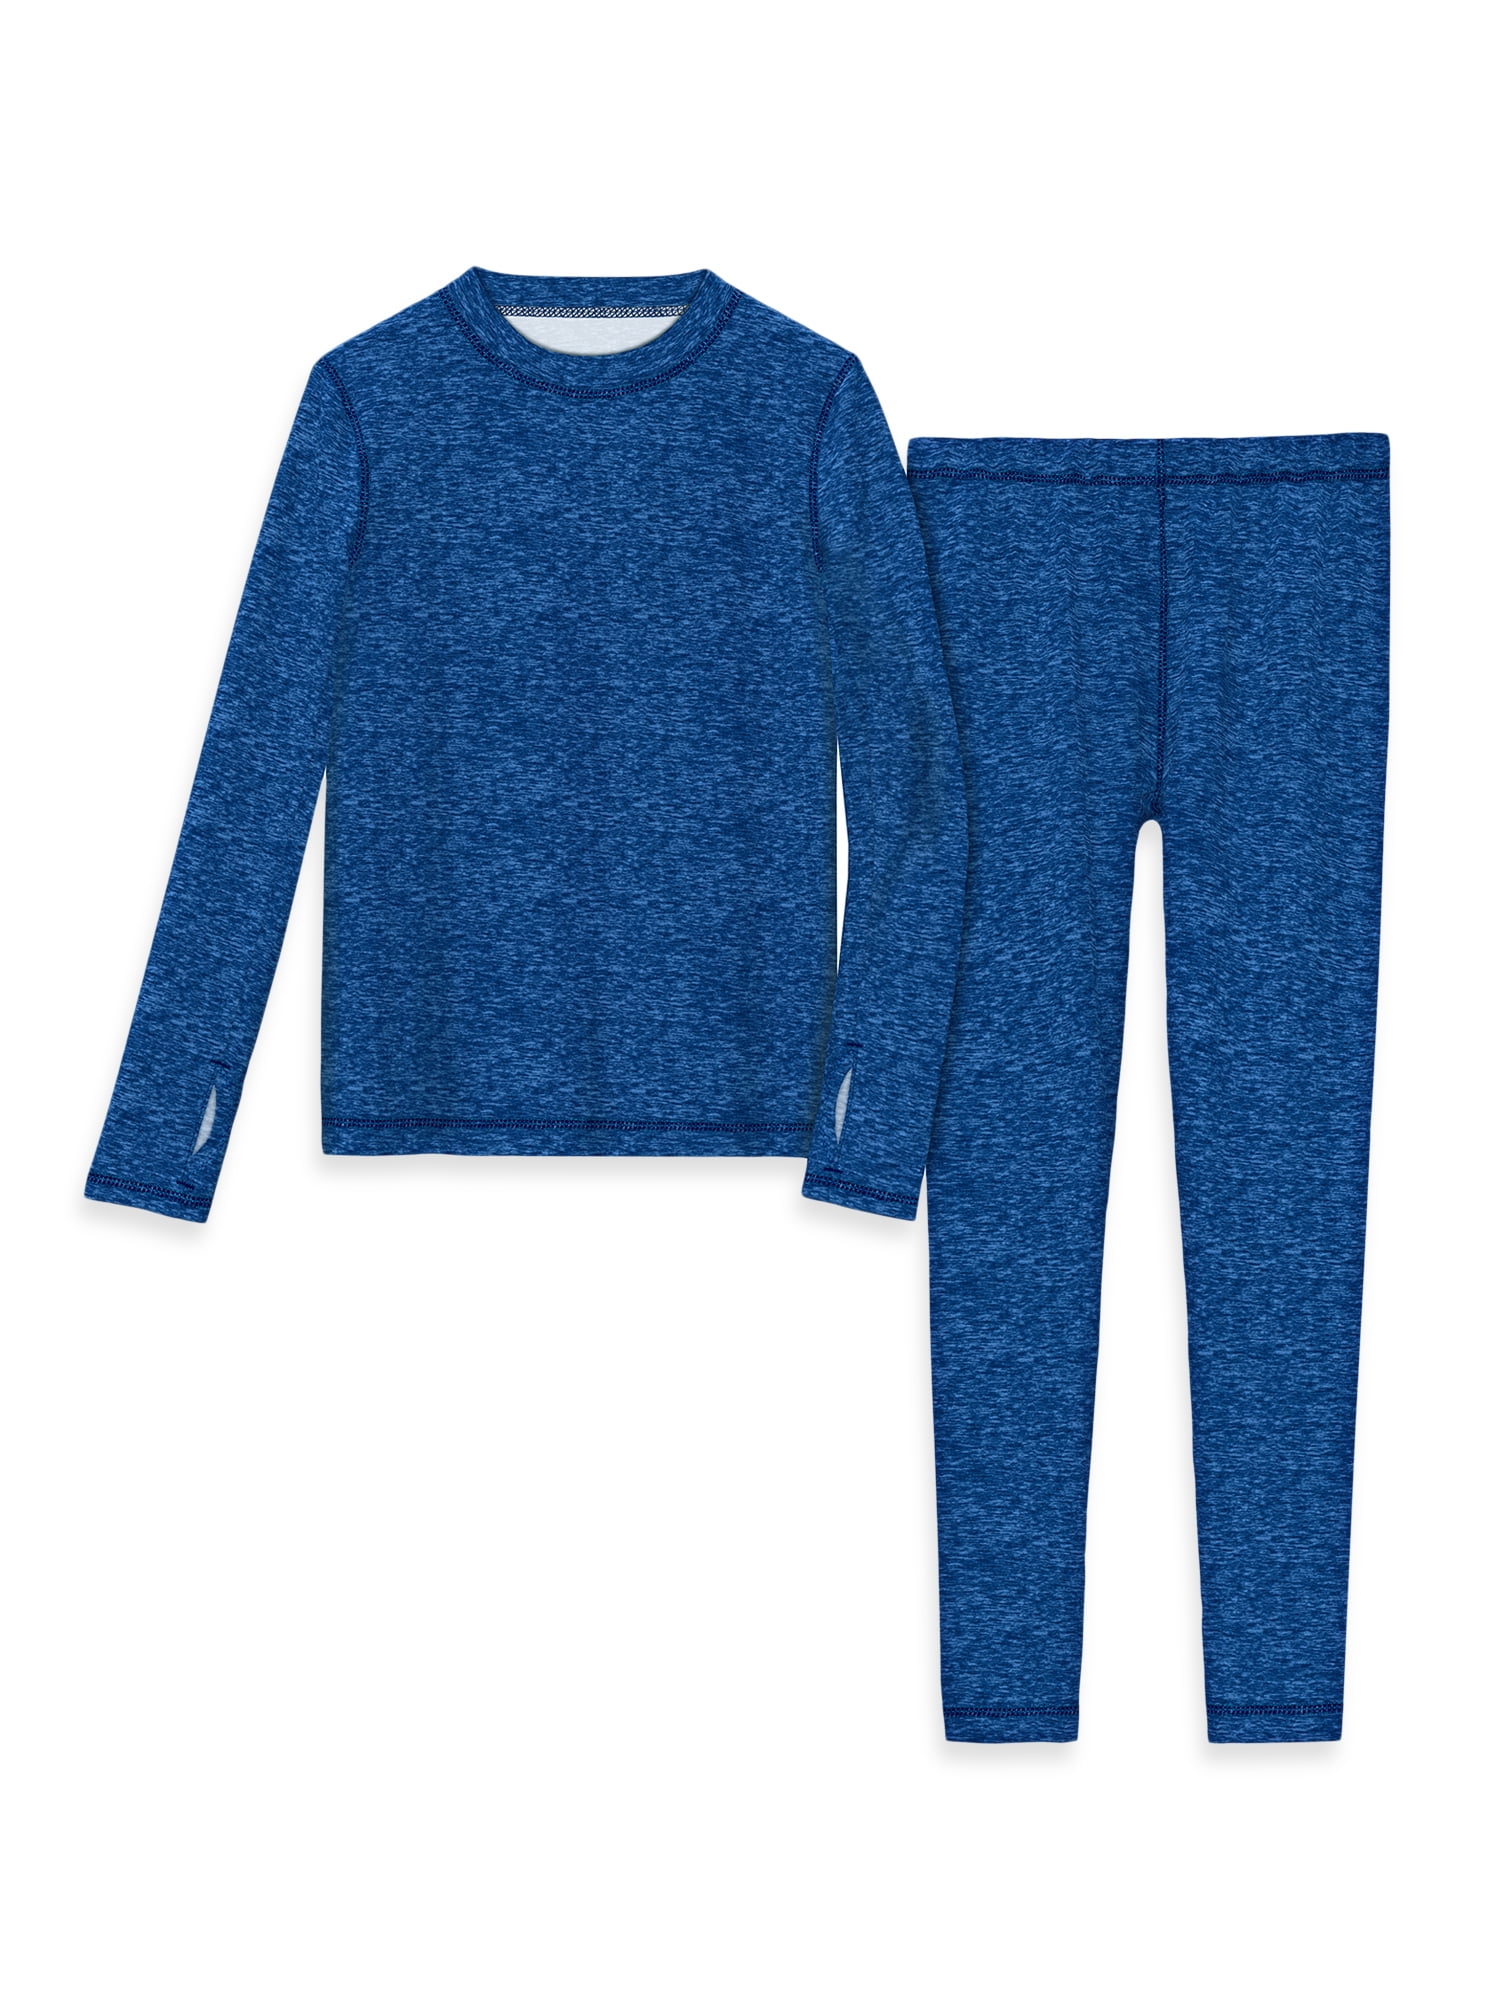 Fruit of the Loom Boys Active Performance Thermal Underwear Set